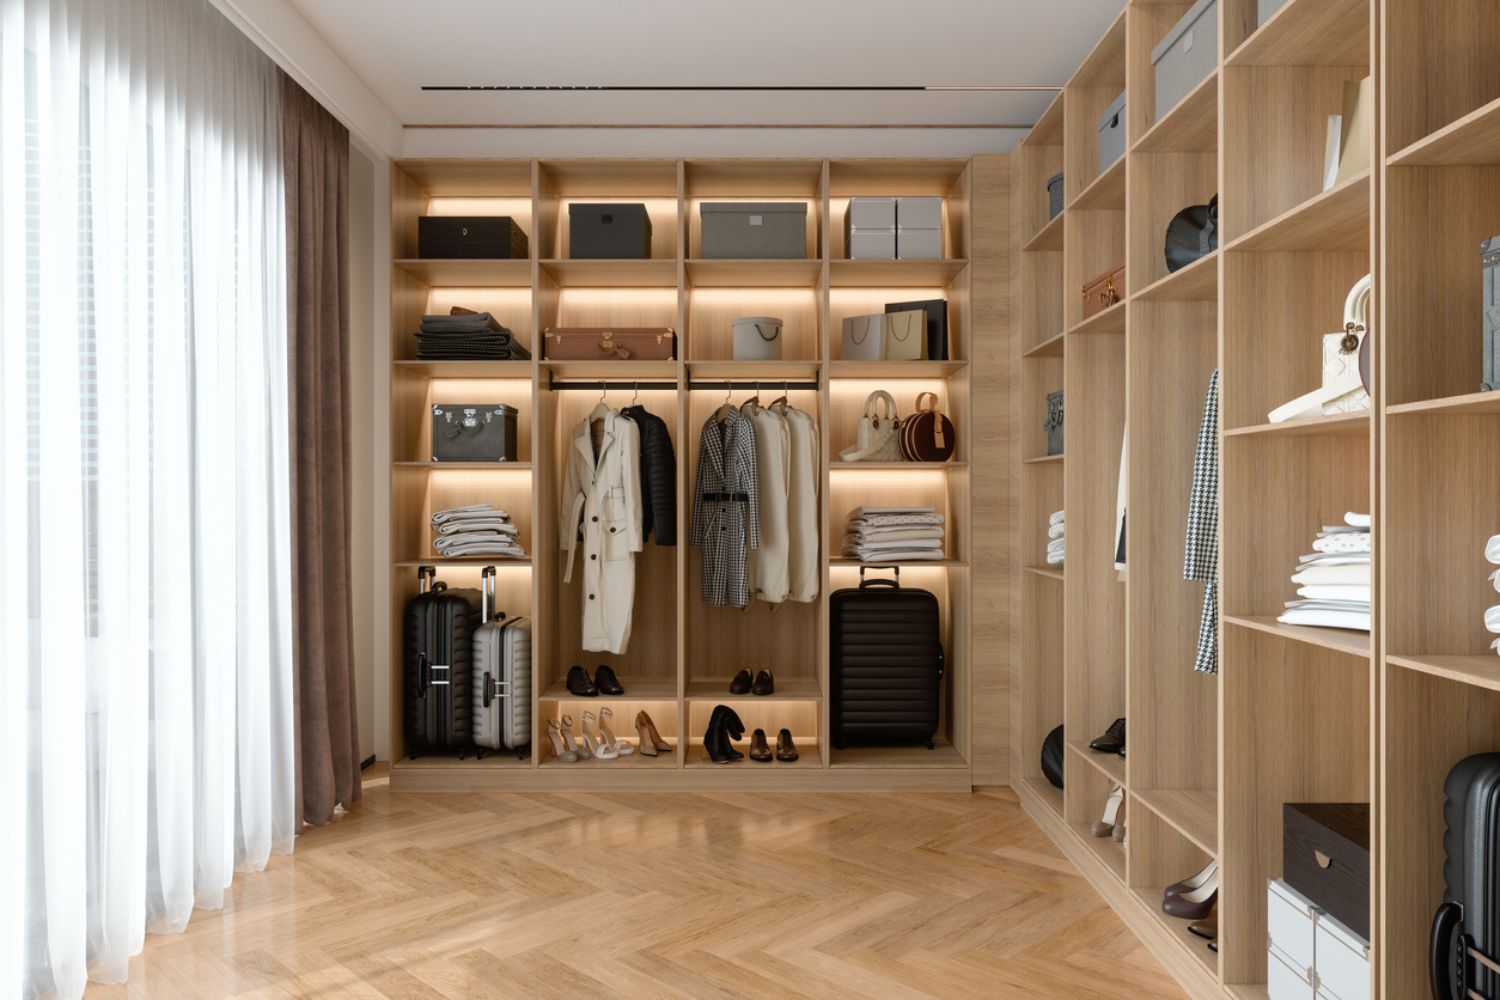 How Much Do Closets by Design Cost: Closet interior